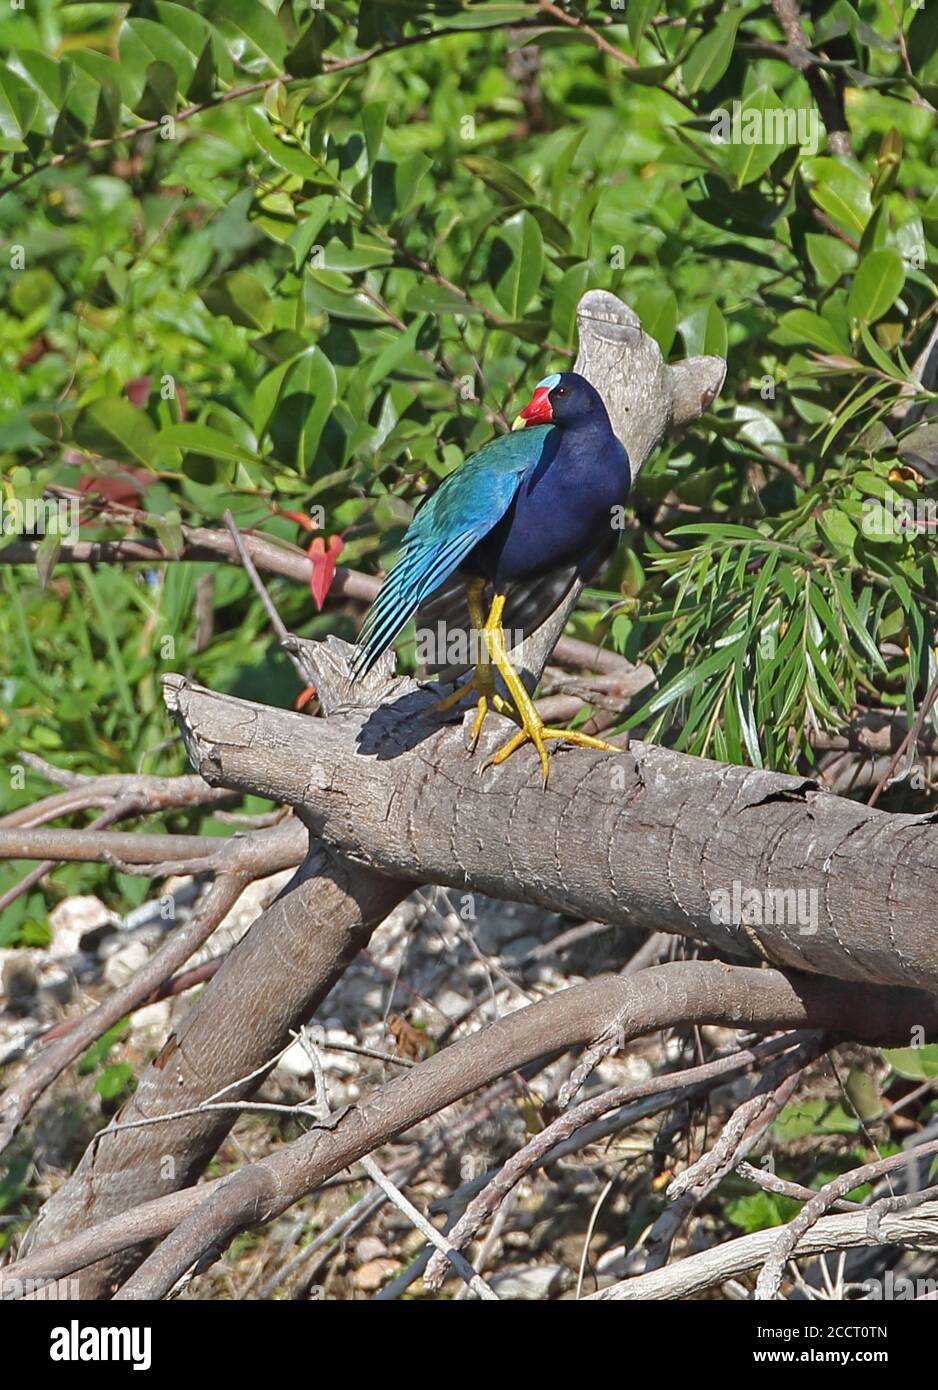 American Purple Gallinule (Porphyrio martinica) adult standing on log with wings drooped, sunning  Zepata peninsula, Cuba             March Stock Photo